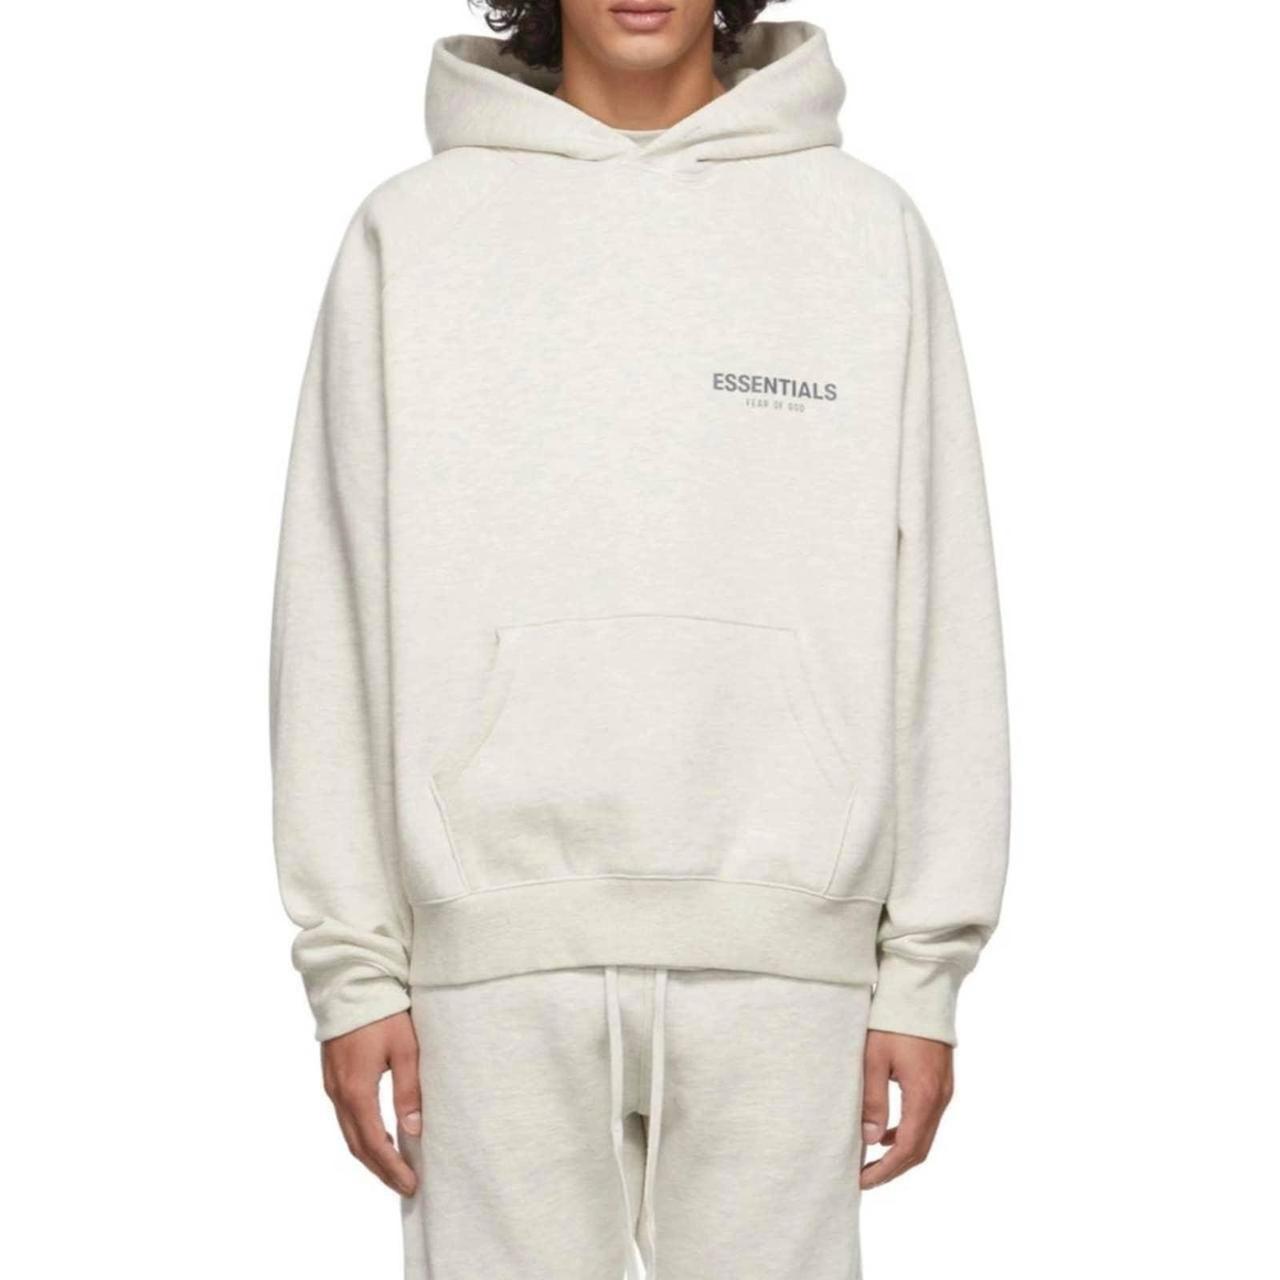 Product Image 2 - Fear of god essentials pullover